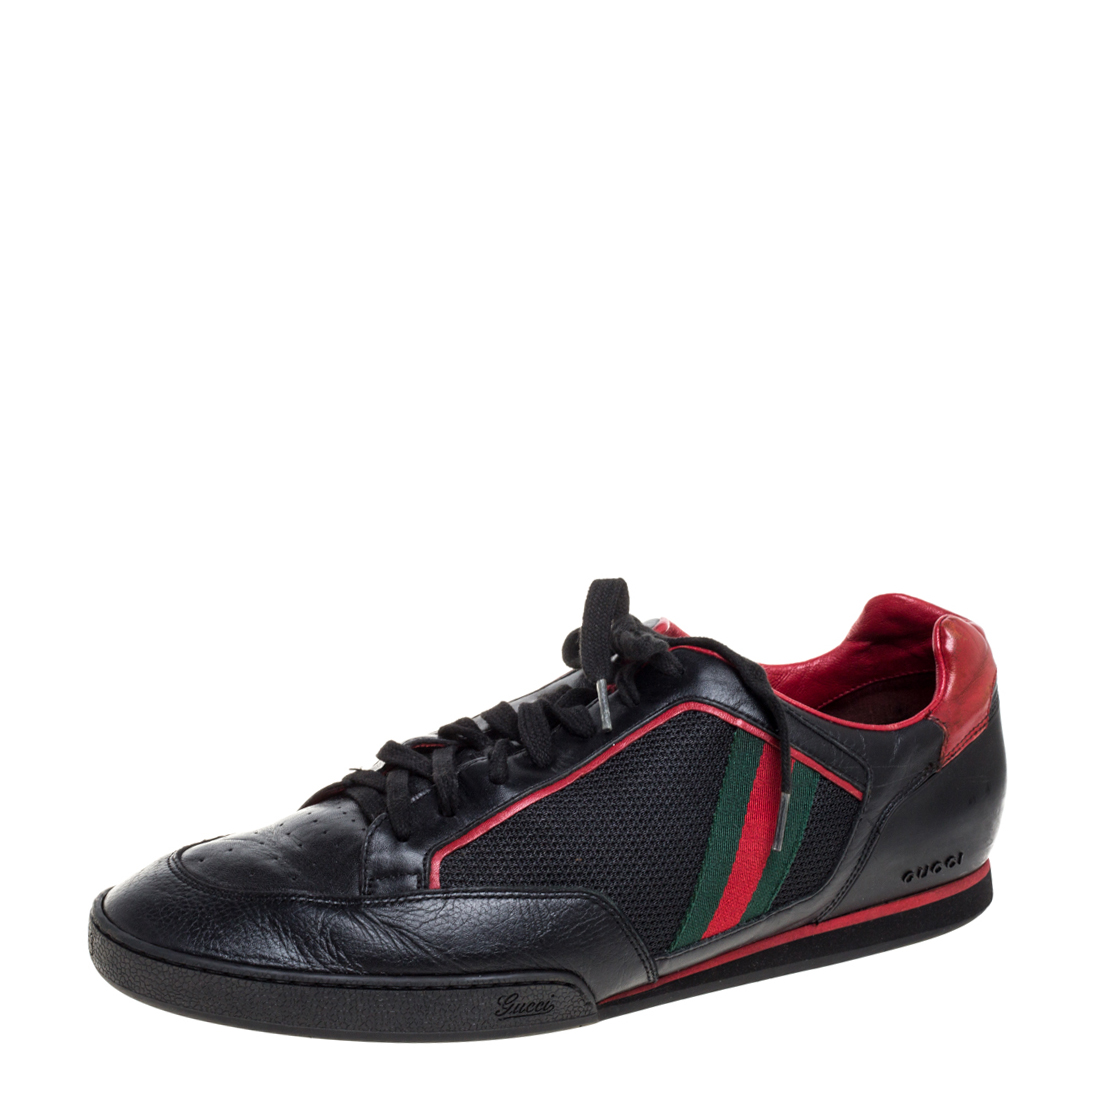 These tennis sneakers from Gucci are crafted from mesh fabric and leather and flaunt a low top frame. It features the signature web detailing on the side panels round toes and laces on the vamps. The black and red combination is the key detail of these stylish sneakers.